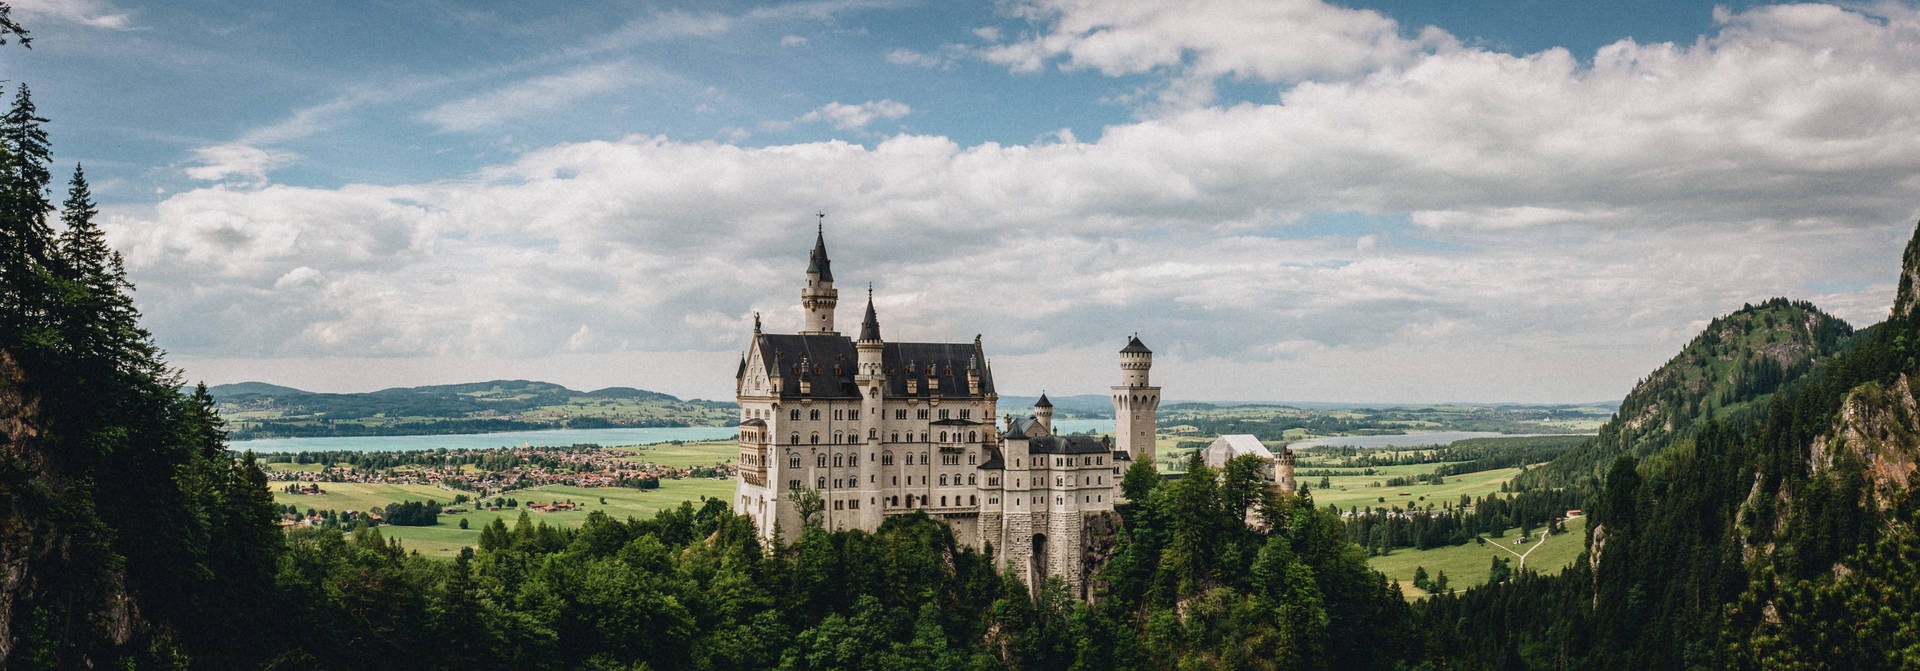 8149X2849 Germany Wallpaper and Background